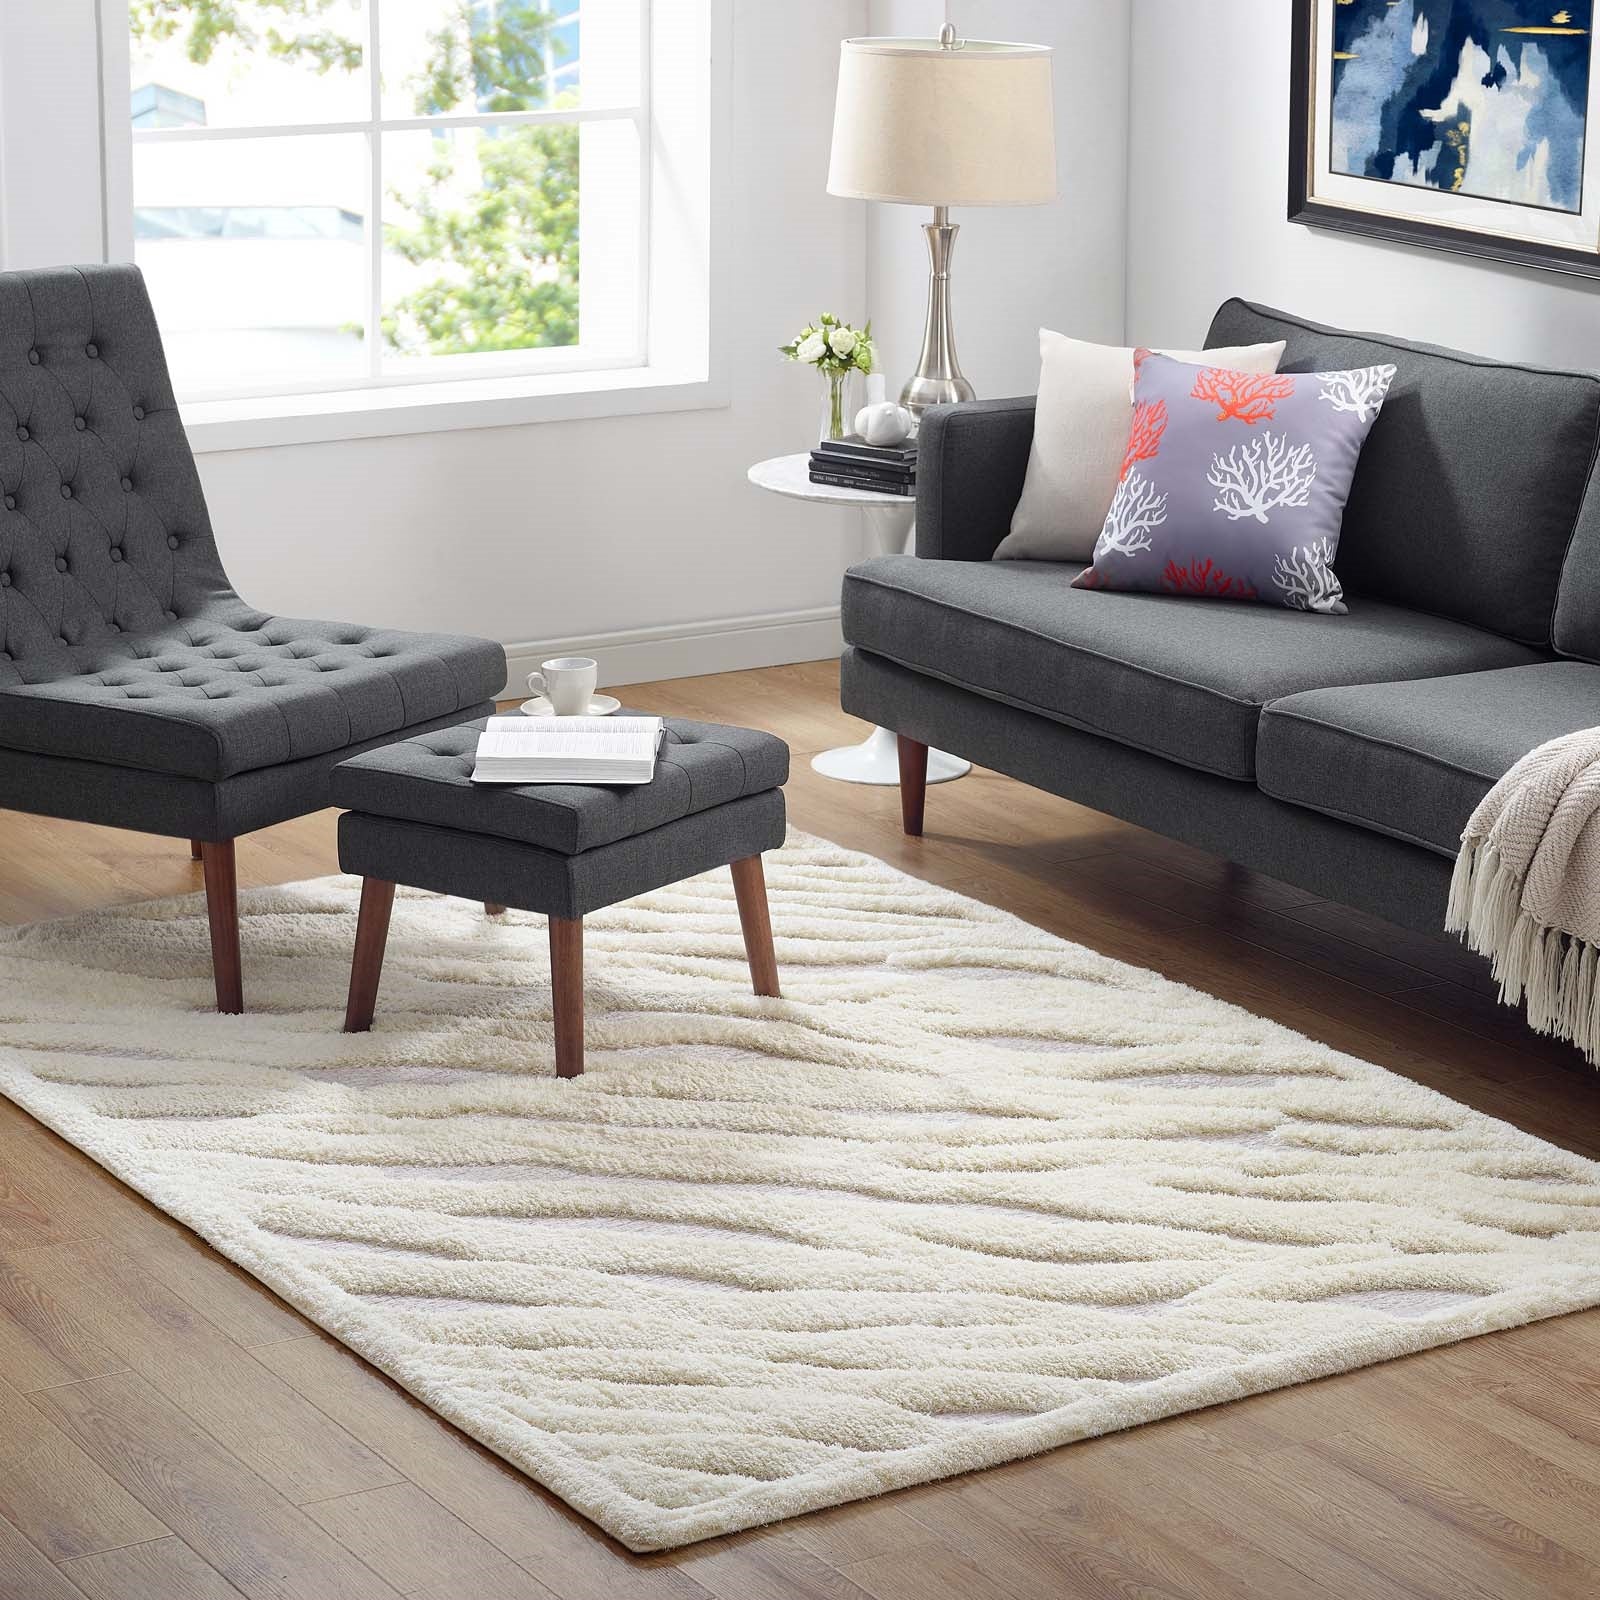 WHIMSICAL CURRENT WAVY ABSTRACT SHAG RUG